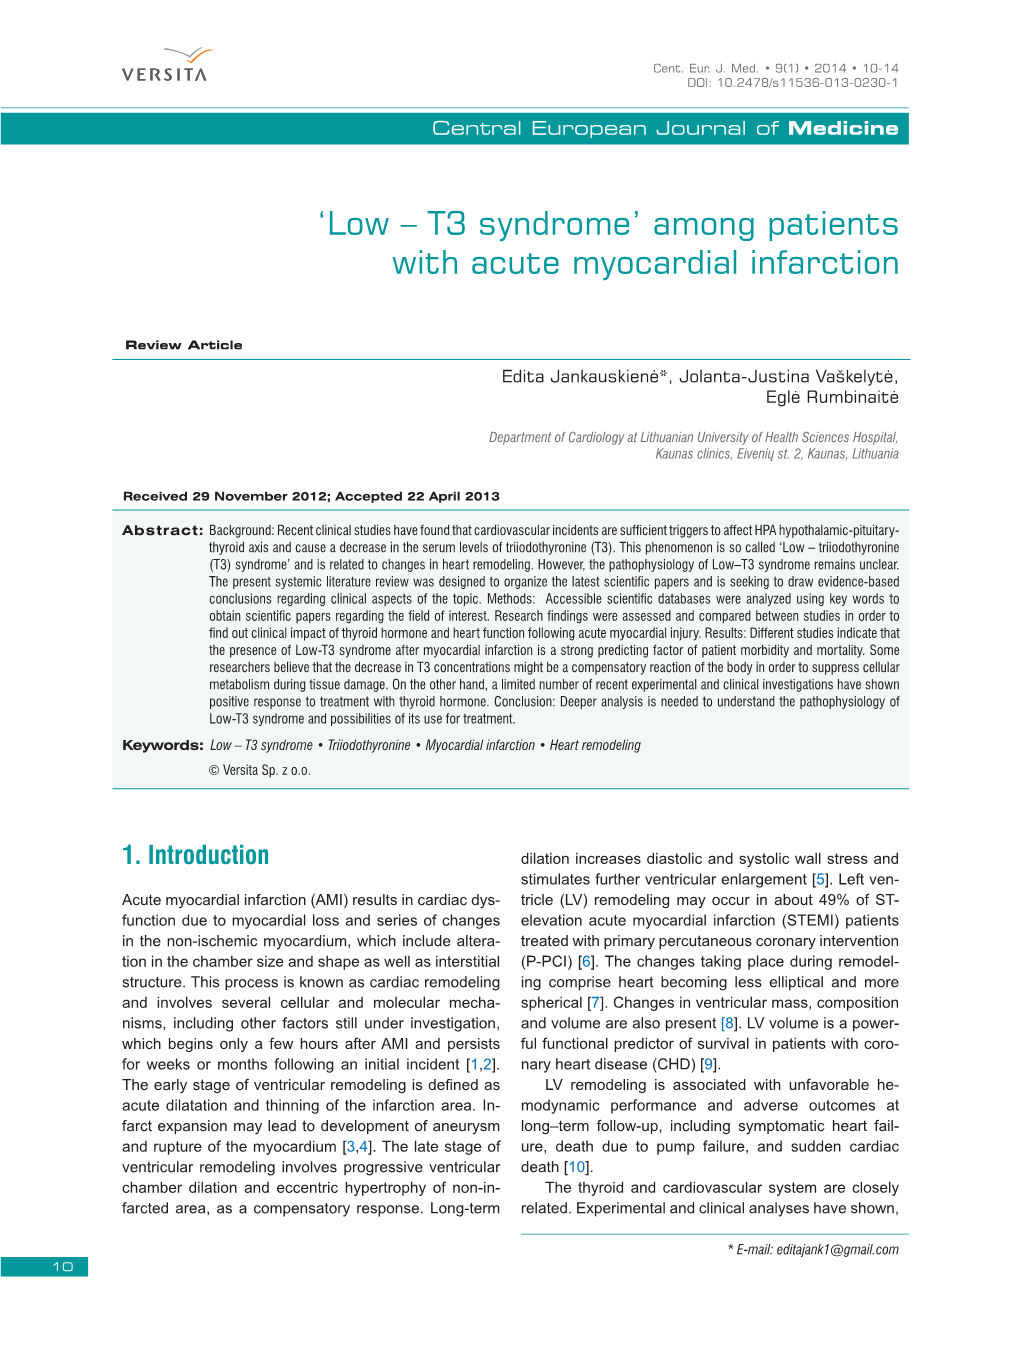 'Low – T3 Syndrome' Among Patients with Acute Myocardial Infarction